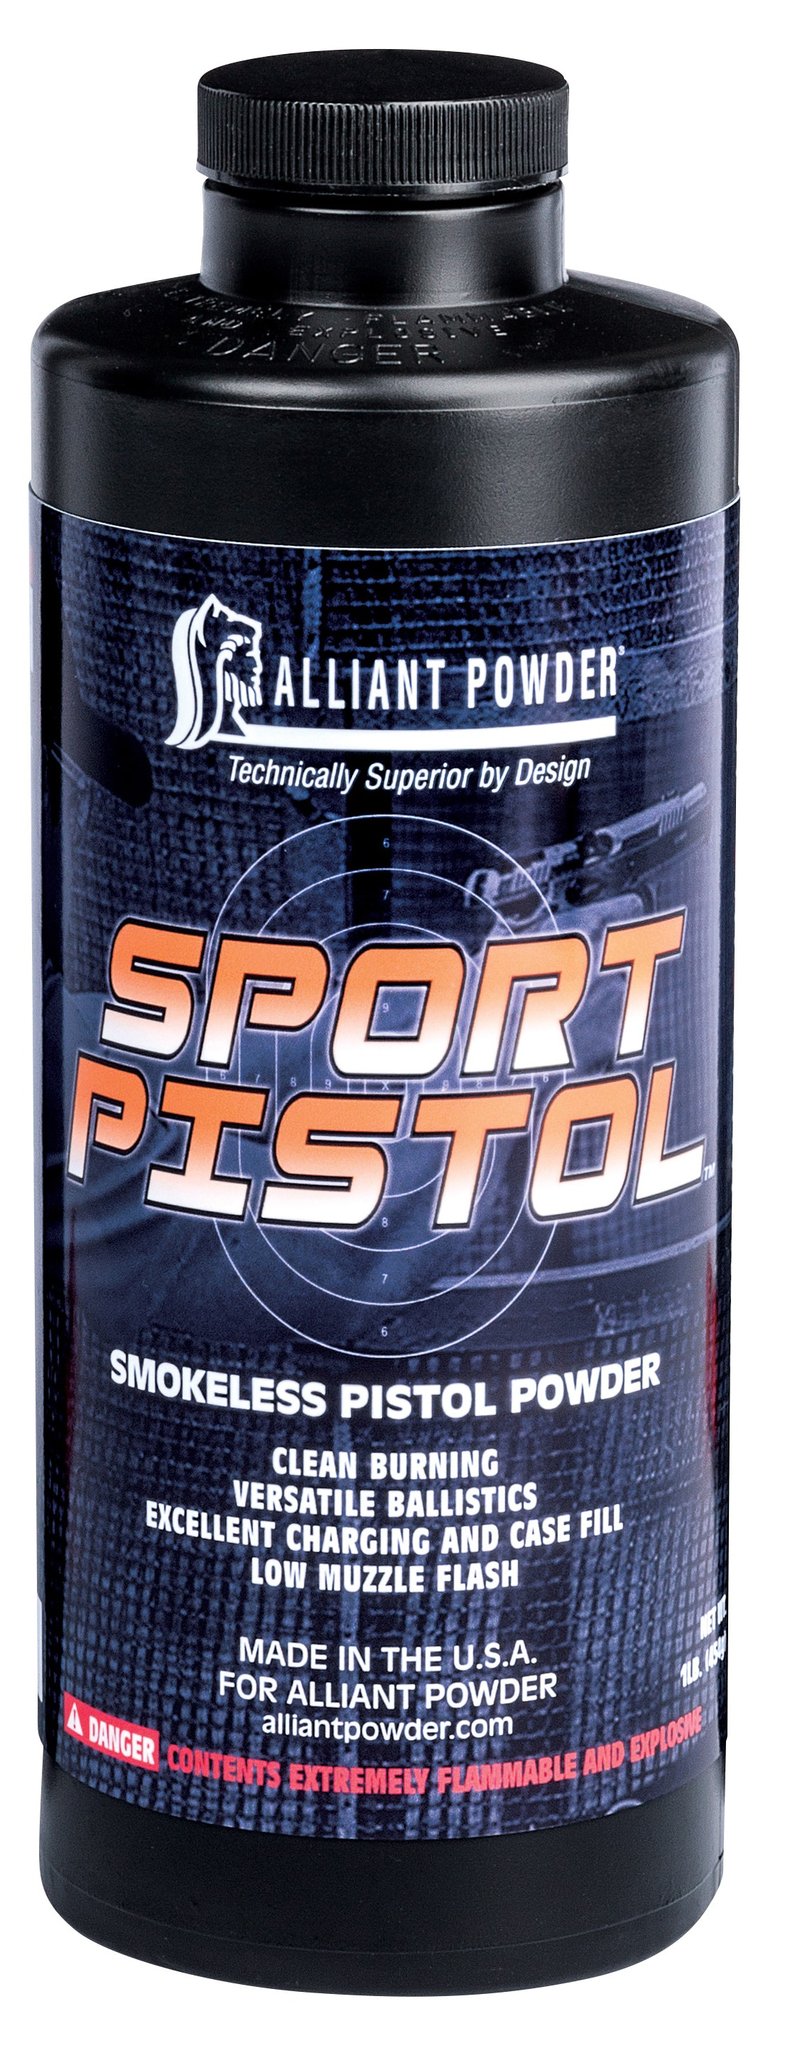 Alliant Powder offers the Sport Pistol Powder to precision handgun and action shooters. (Photo: Alliant Powder)